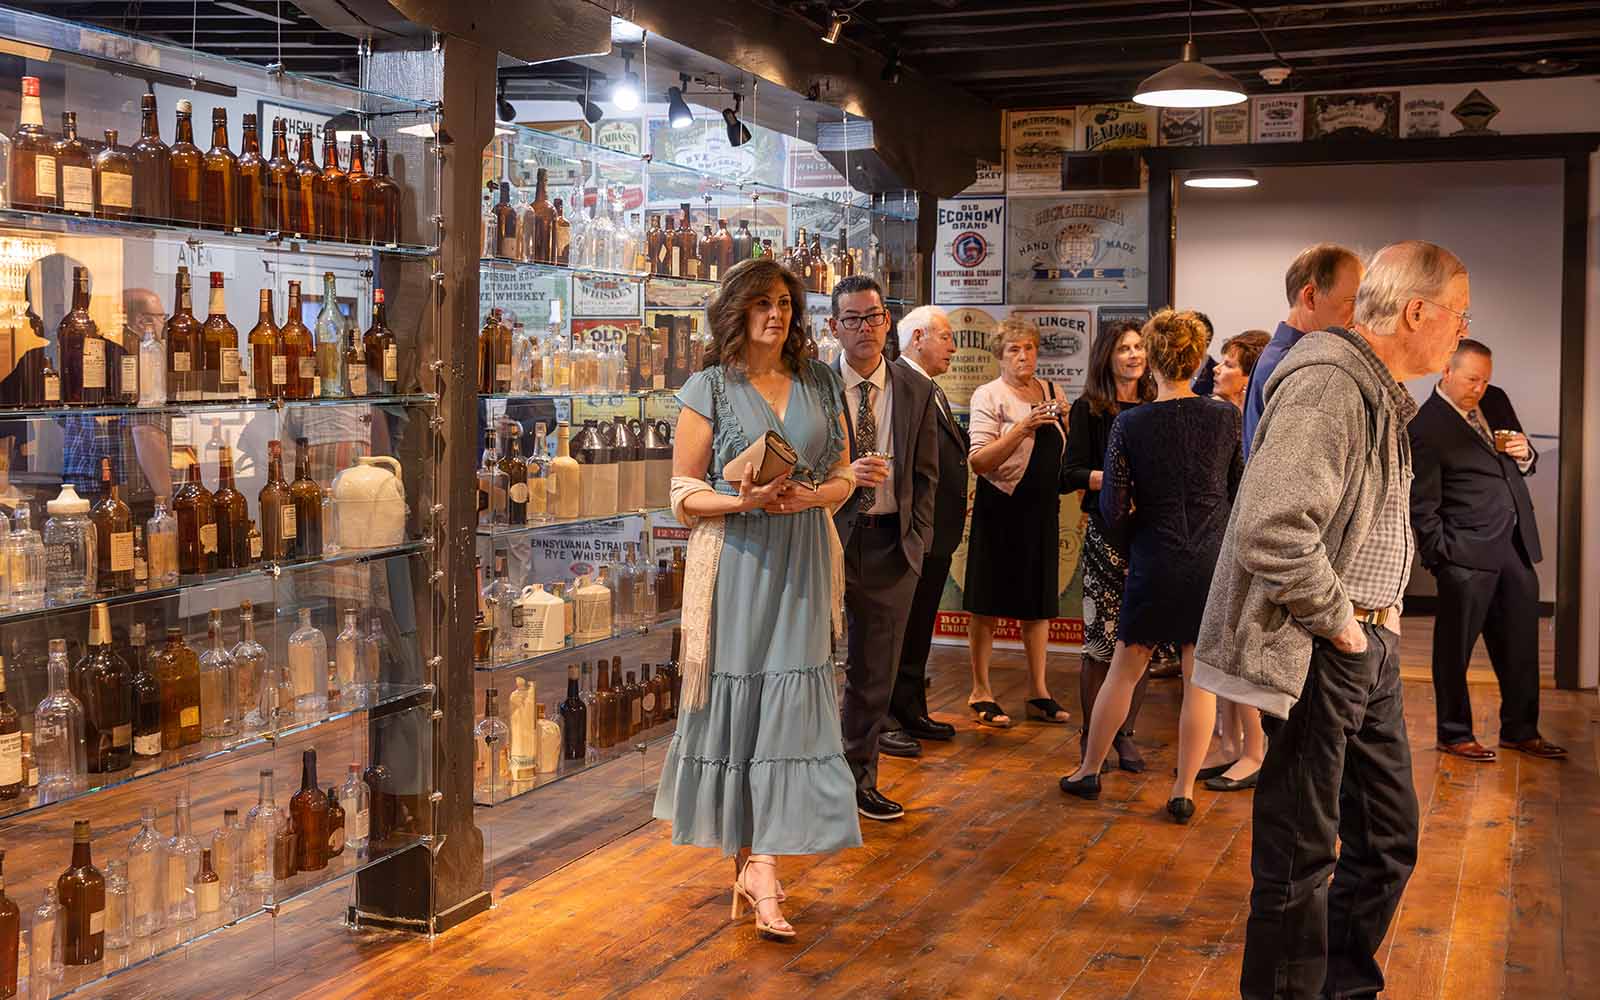 Guests mill around in a gallery with a wall of booze bottles in dressy clothes.